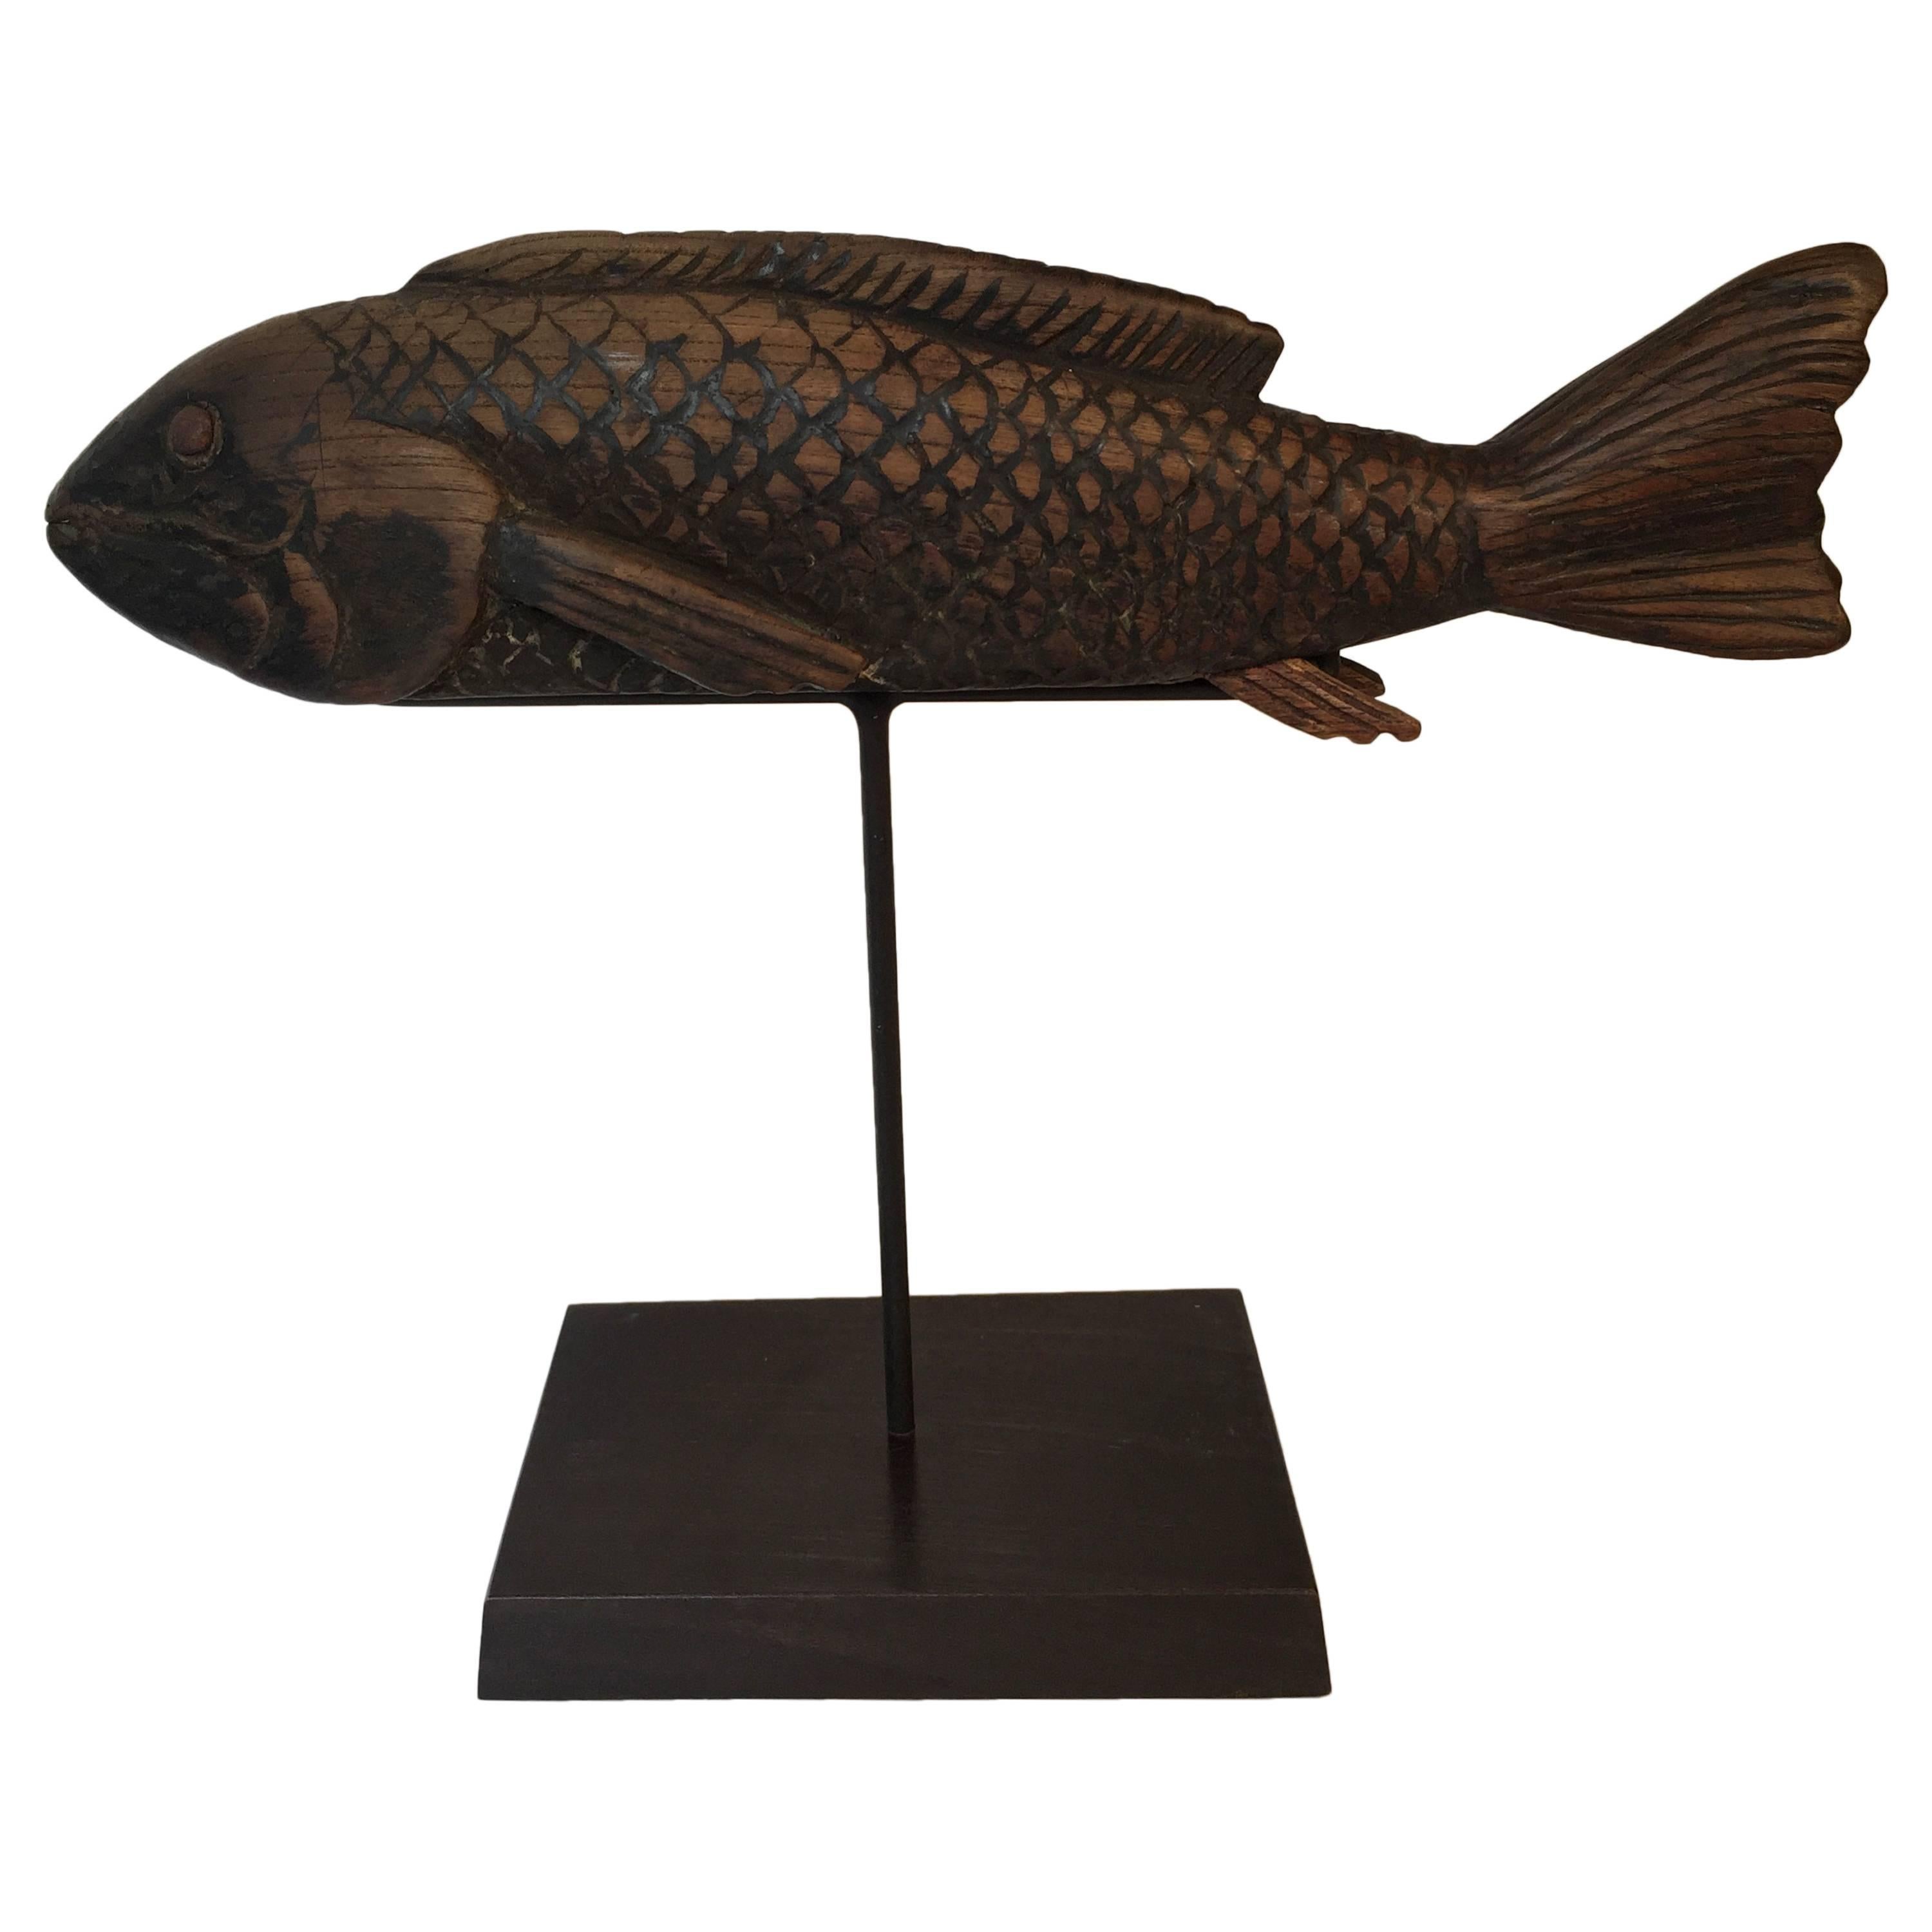 Japanese Hand-Carved Wood KOI Good Fortune Fish Sculpture, 19thc FREE SHIP